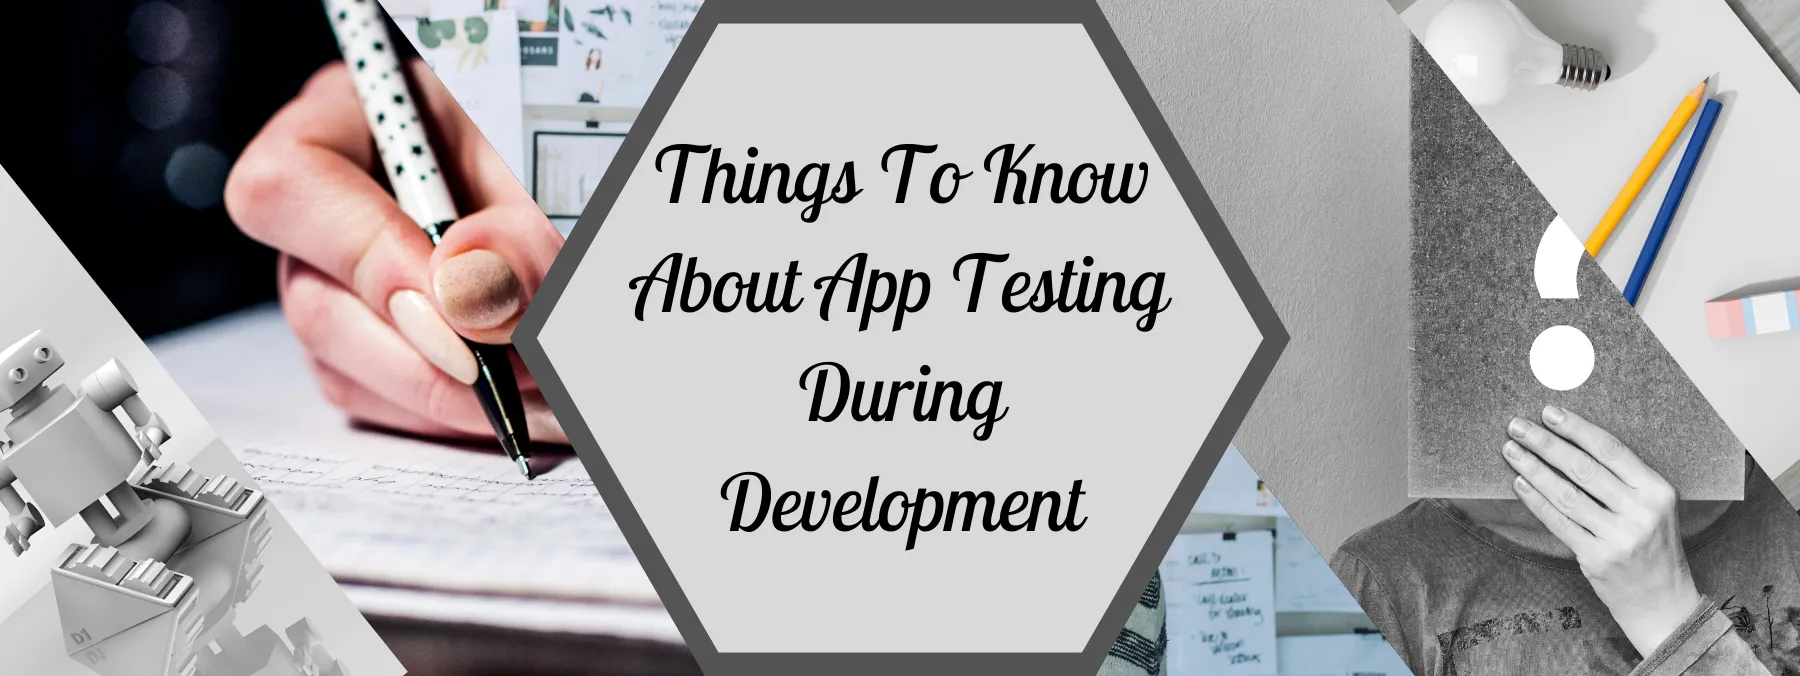 Things To Know About App Testing During Development